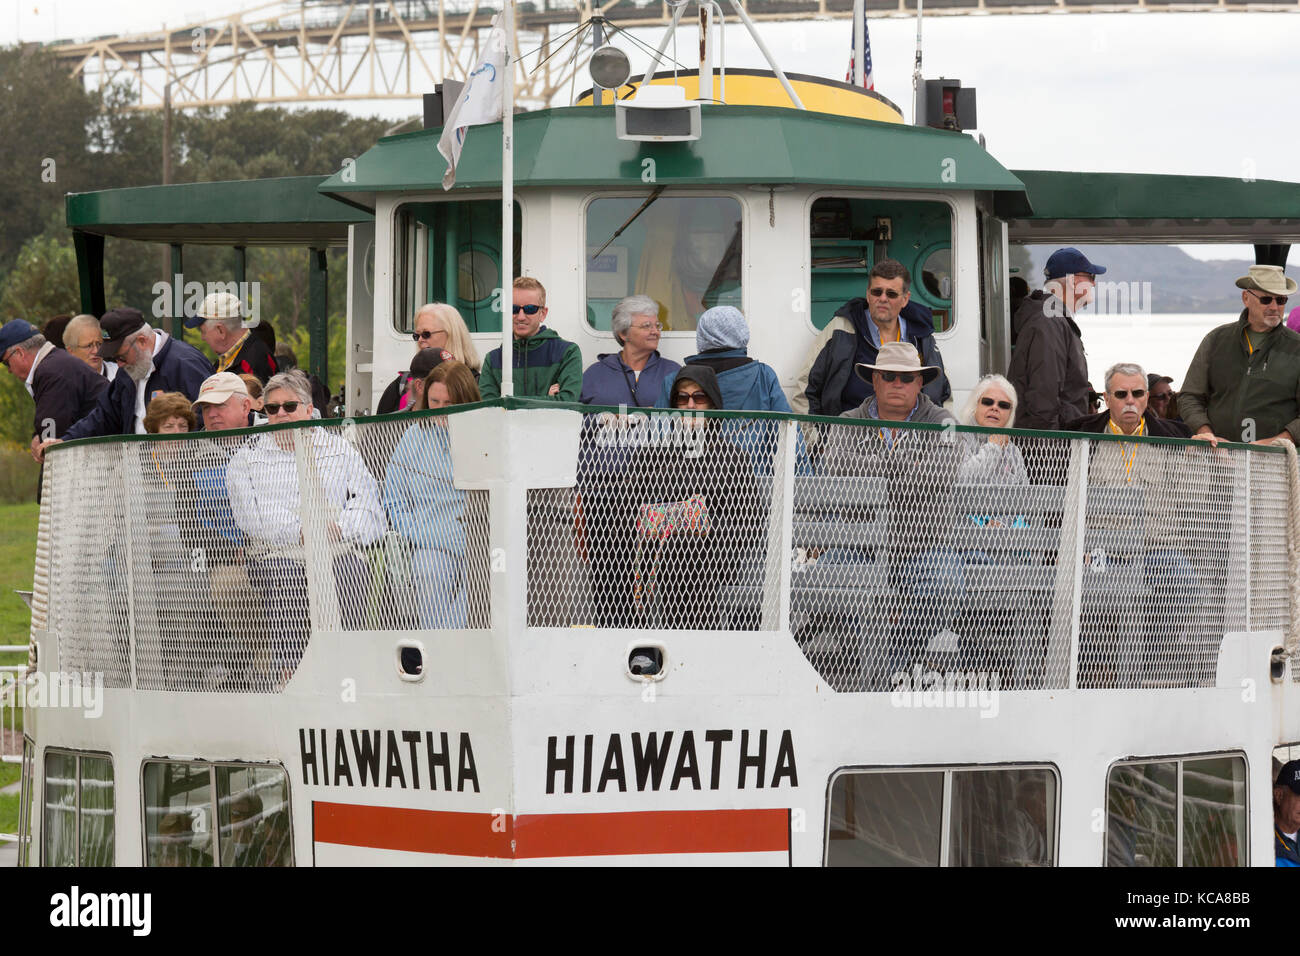 Sault Ste Marie, Ontario Canada - Tourists on a boat tour of the Soo Locks as the boat passes through the Canadian lock. The small Canadian lock is us Stock Photo